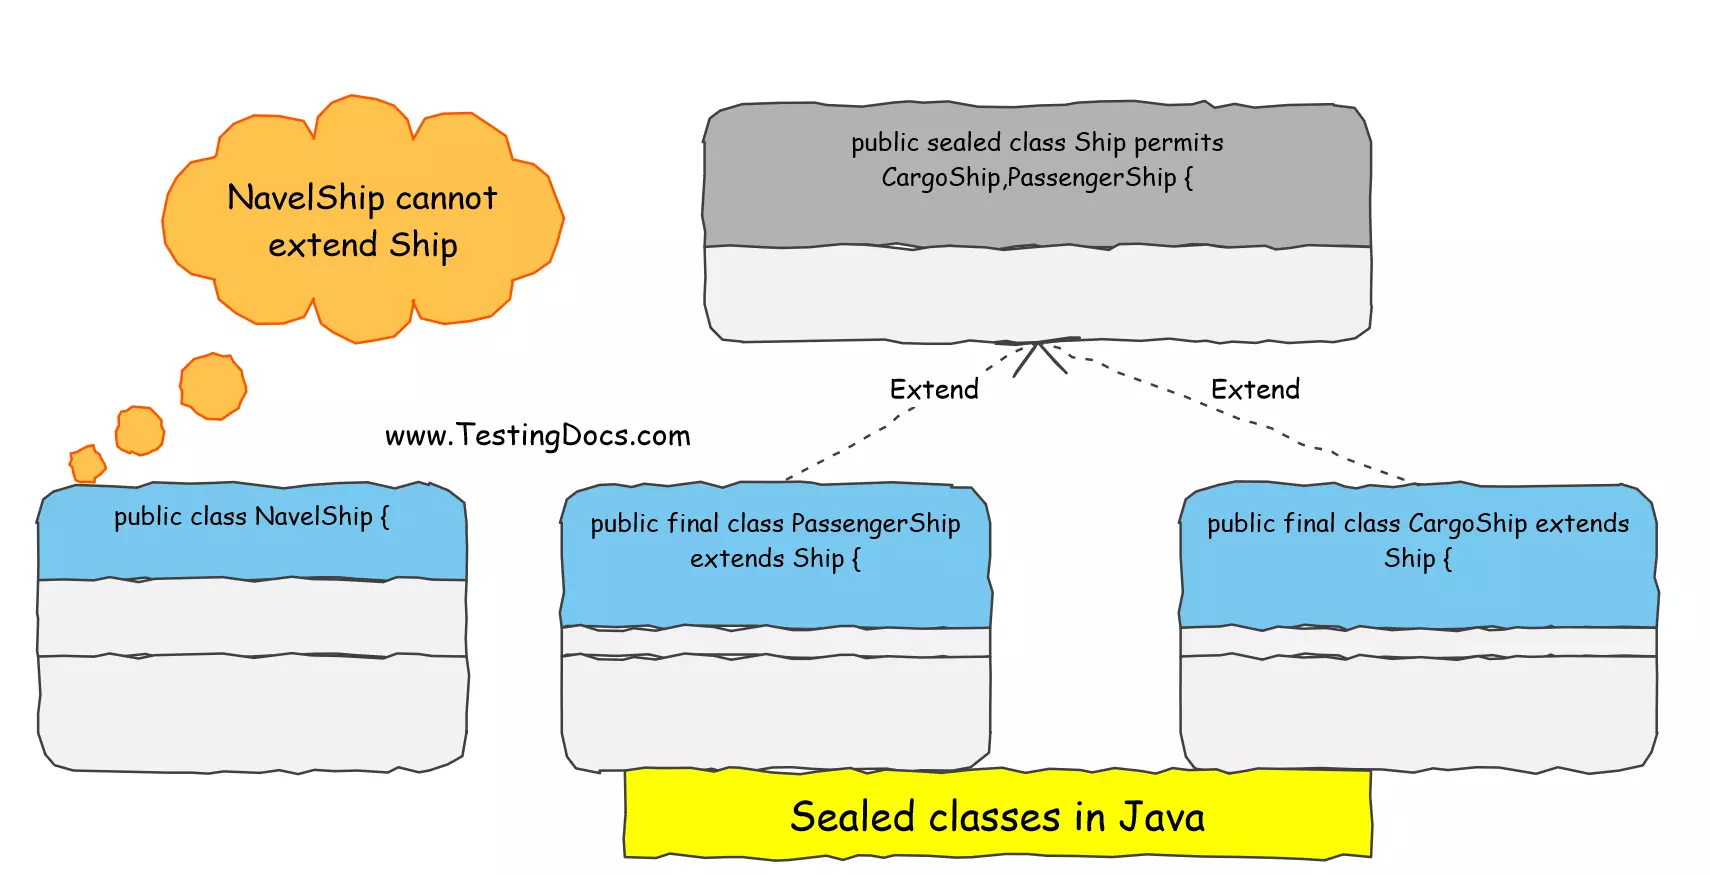 Sealed classes in Java